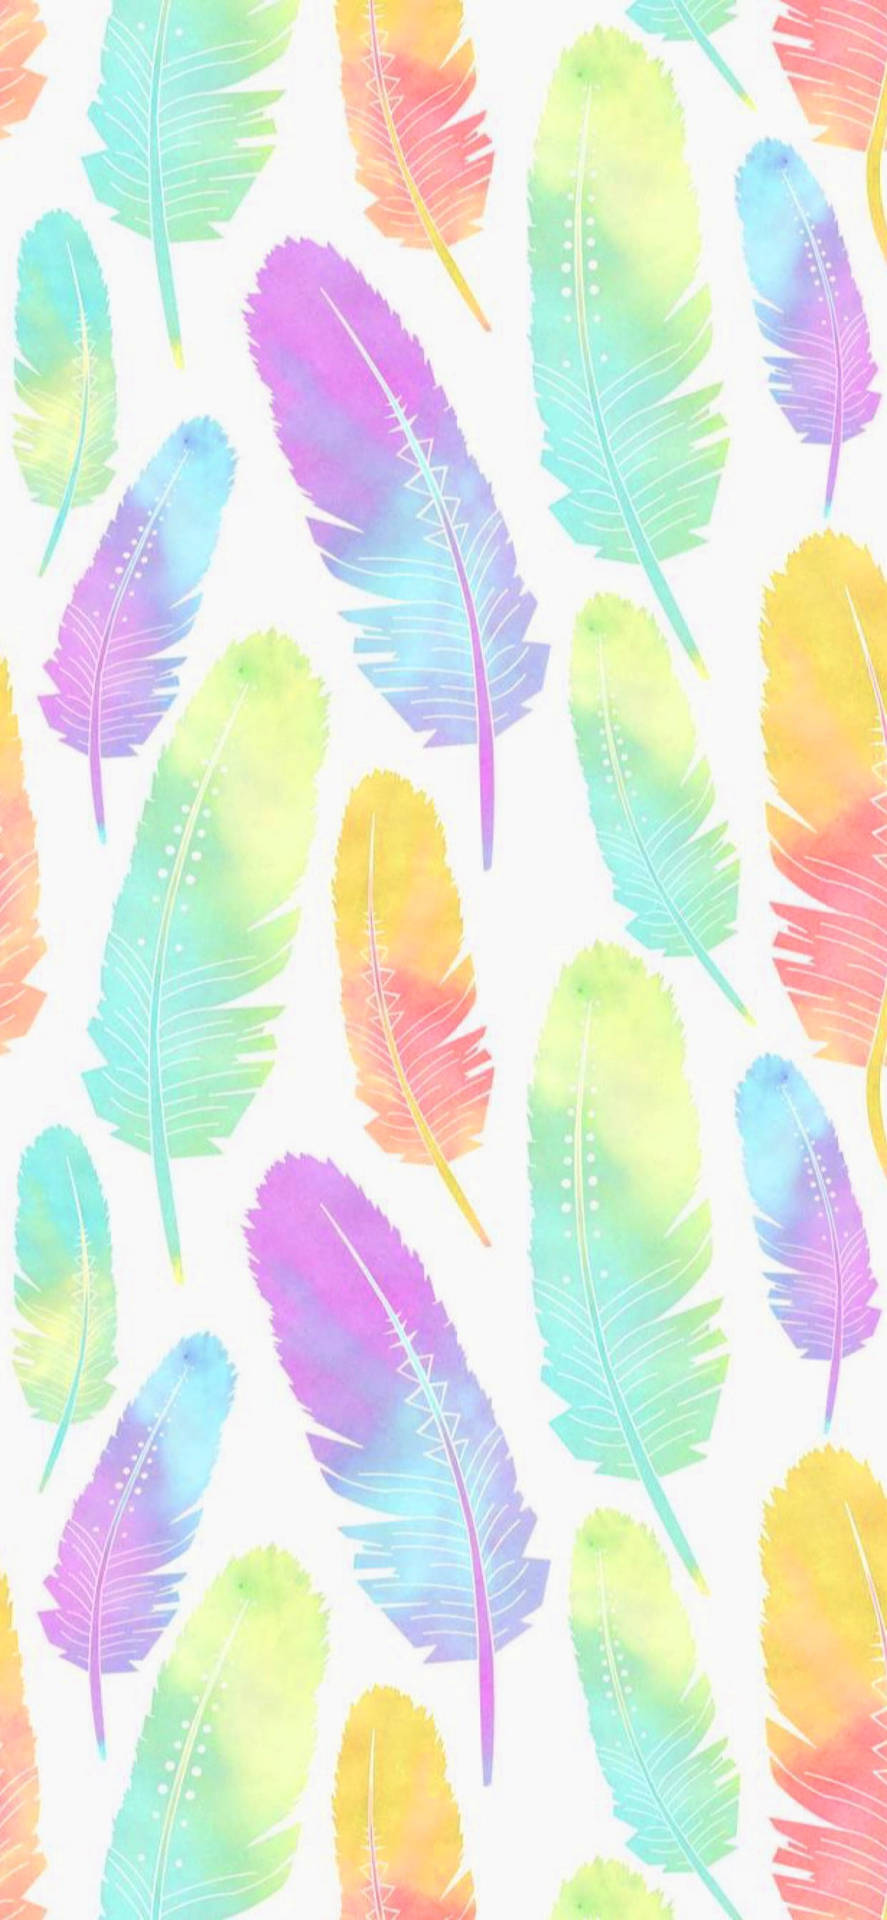 Feathers Cute Pastel Colors Background